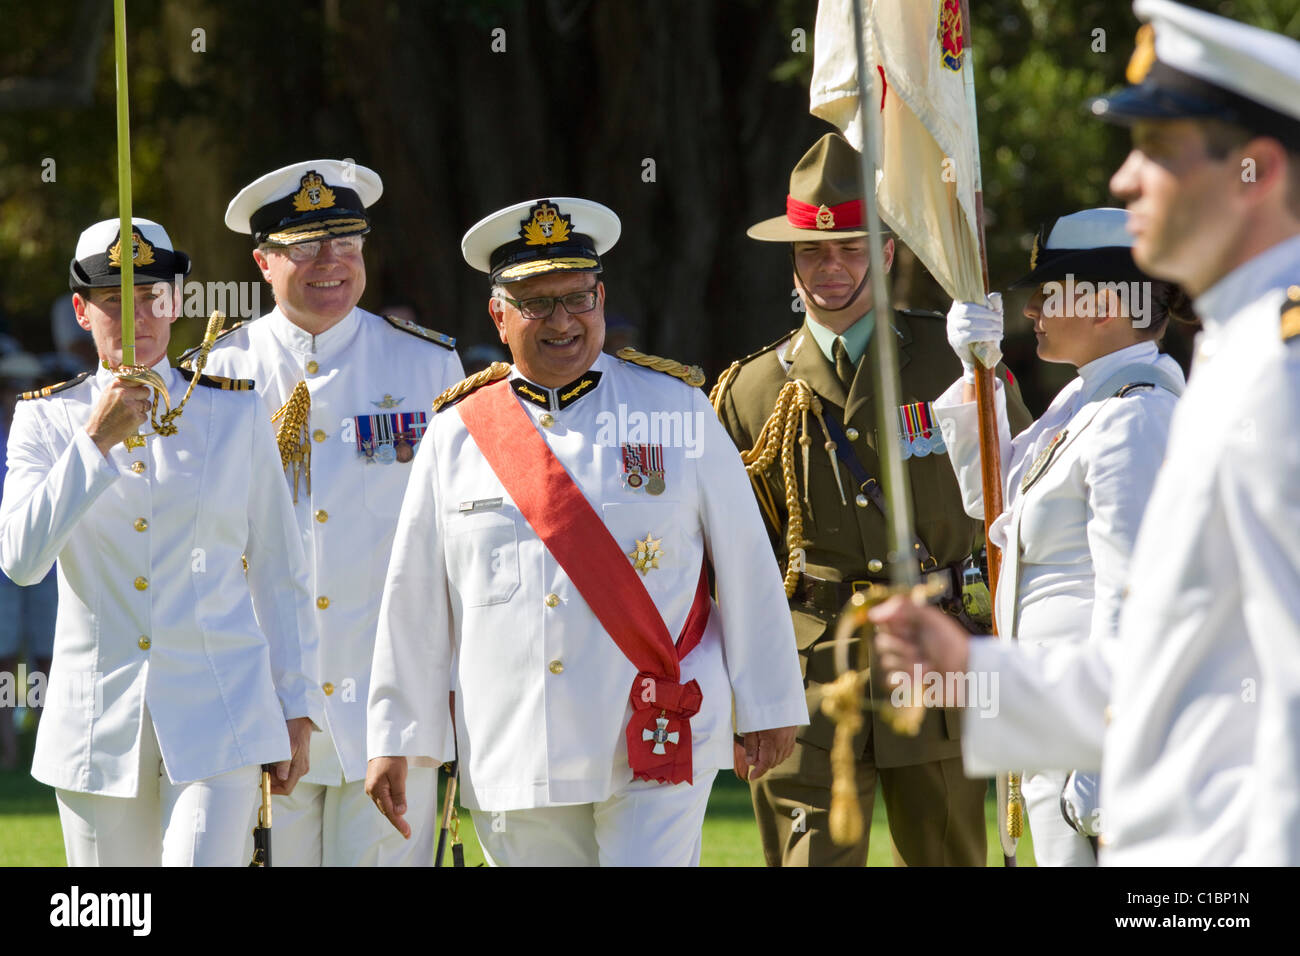 The Governor-General, Rt Hon Sir Anand Satyanand inspects the Royal New Zealand Navy performing a beating retreat sunset ceremon Stock Photo